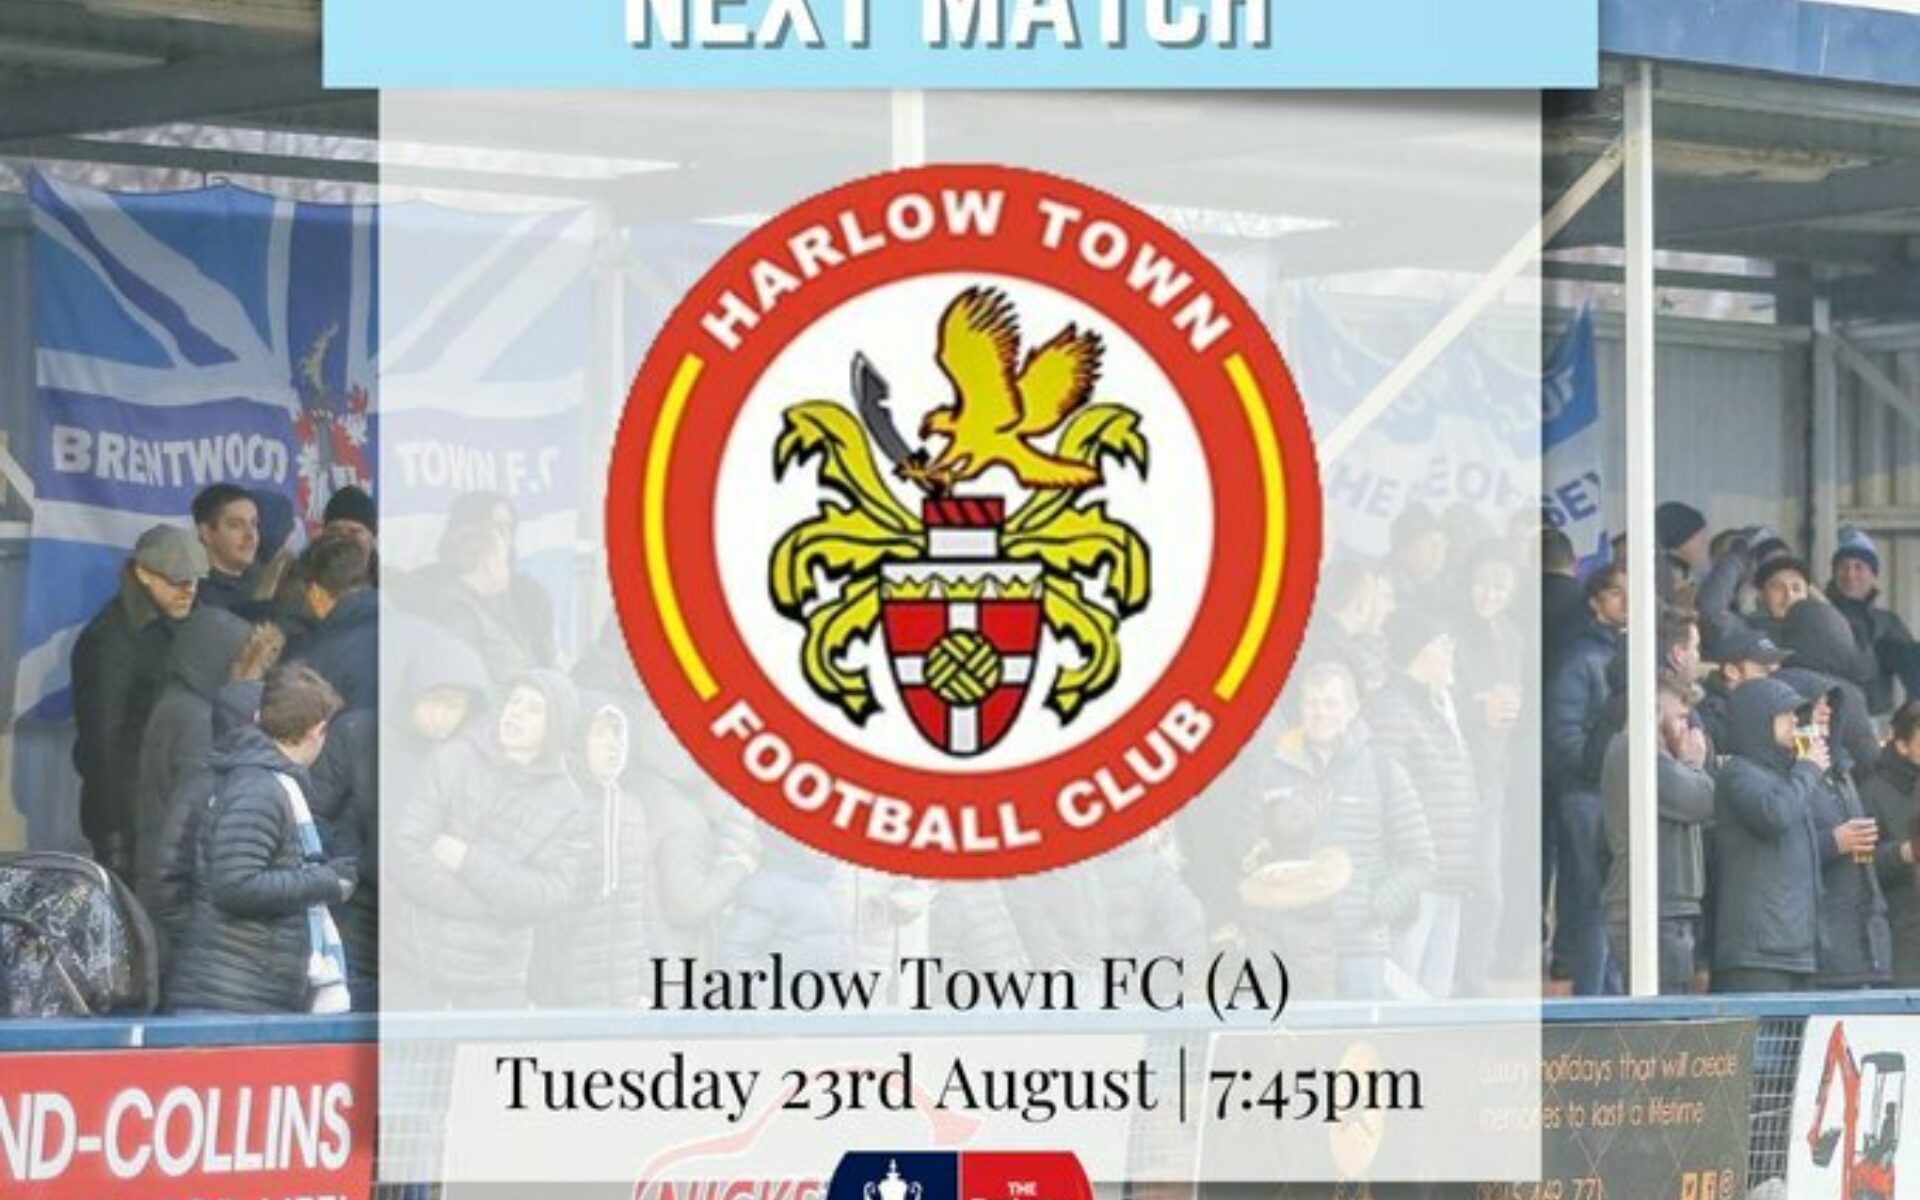 It's a Tuesday replay at Harlow Featured Image